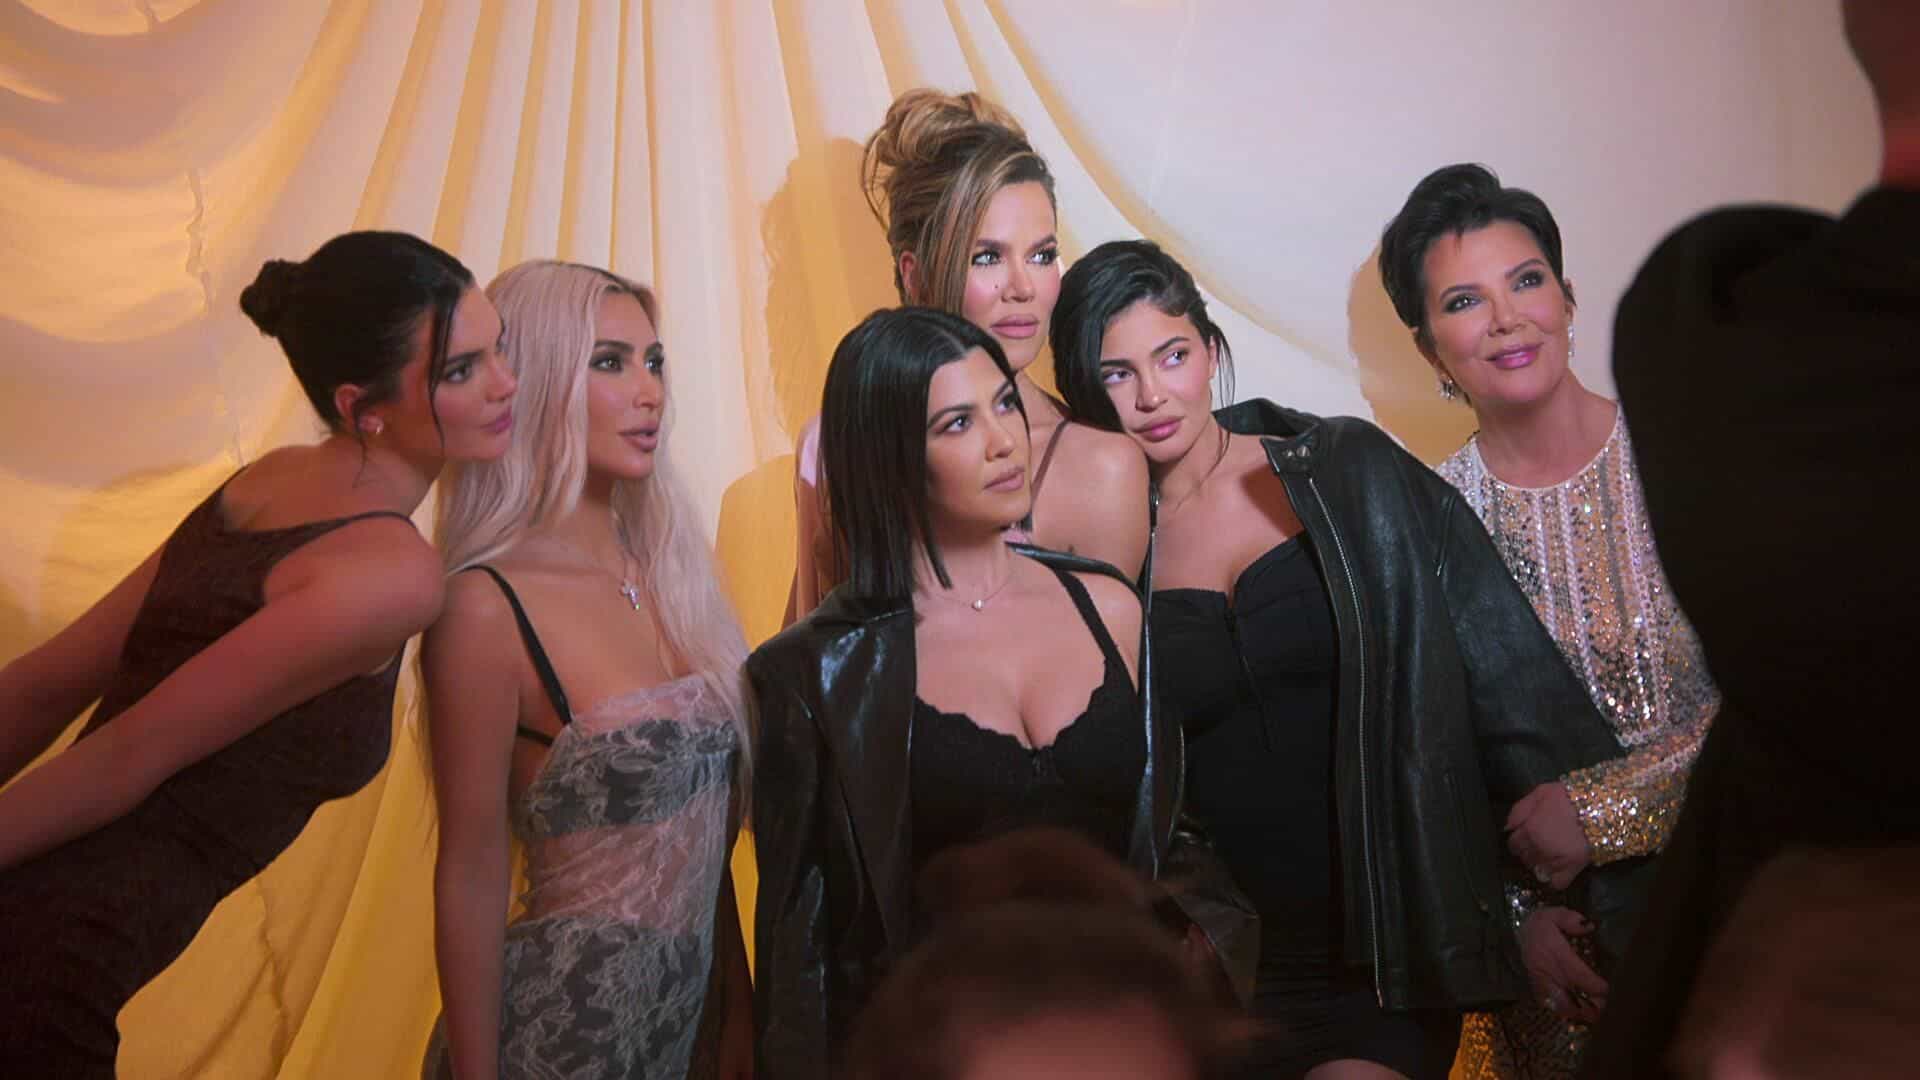 The Kardashians pose for a photo together in this image from Kardashian Jenner Productions. 